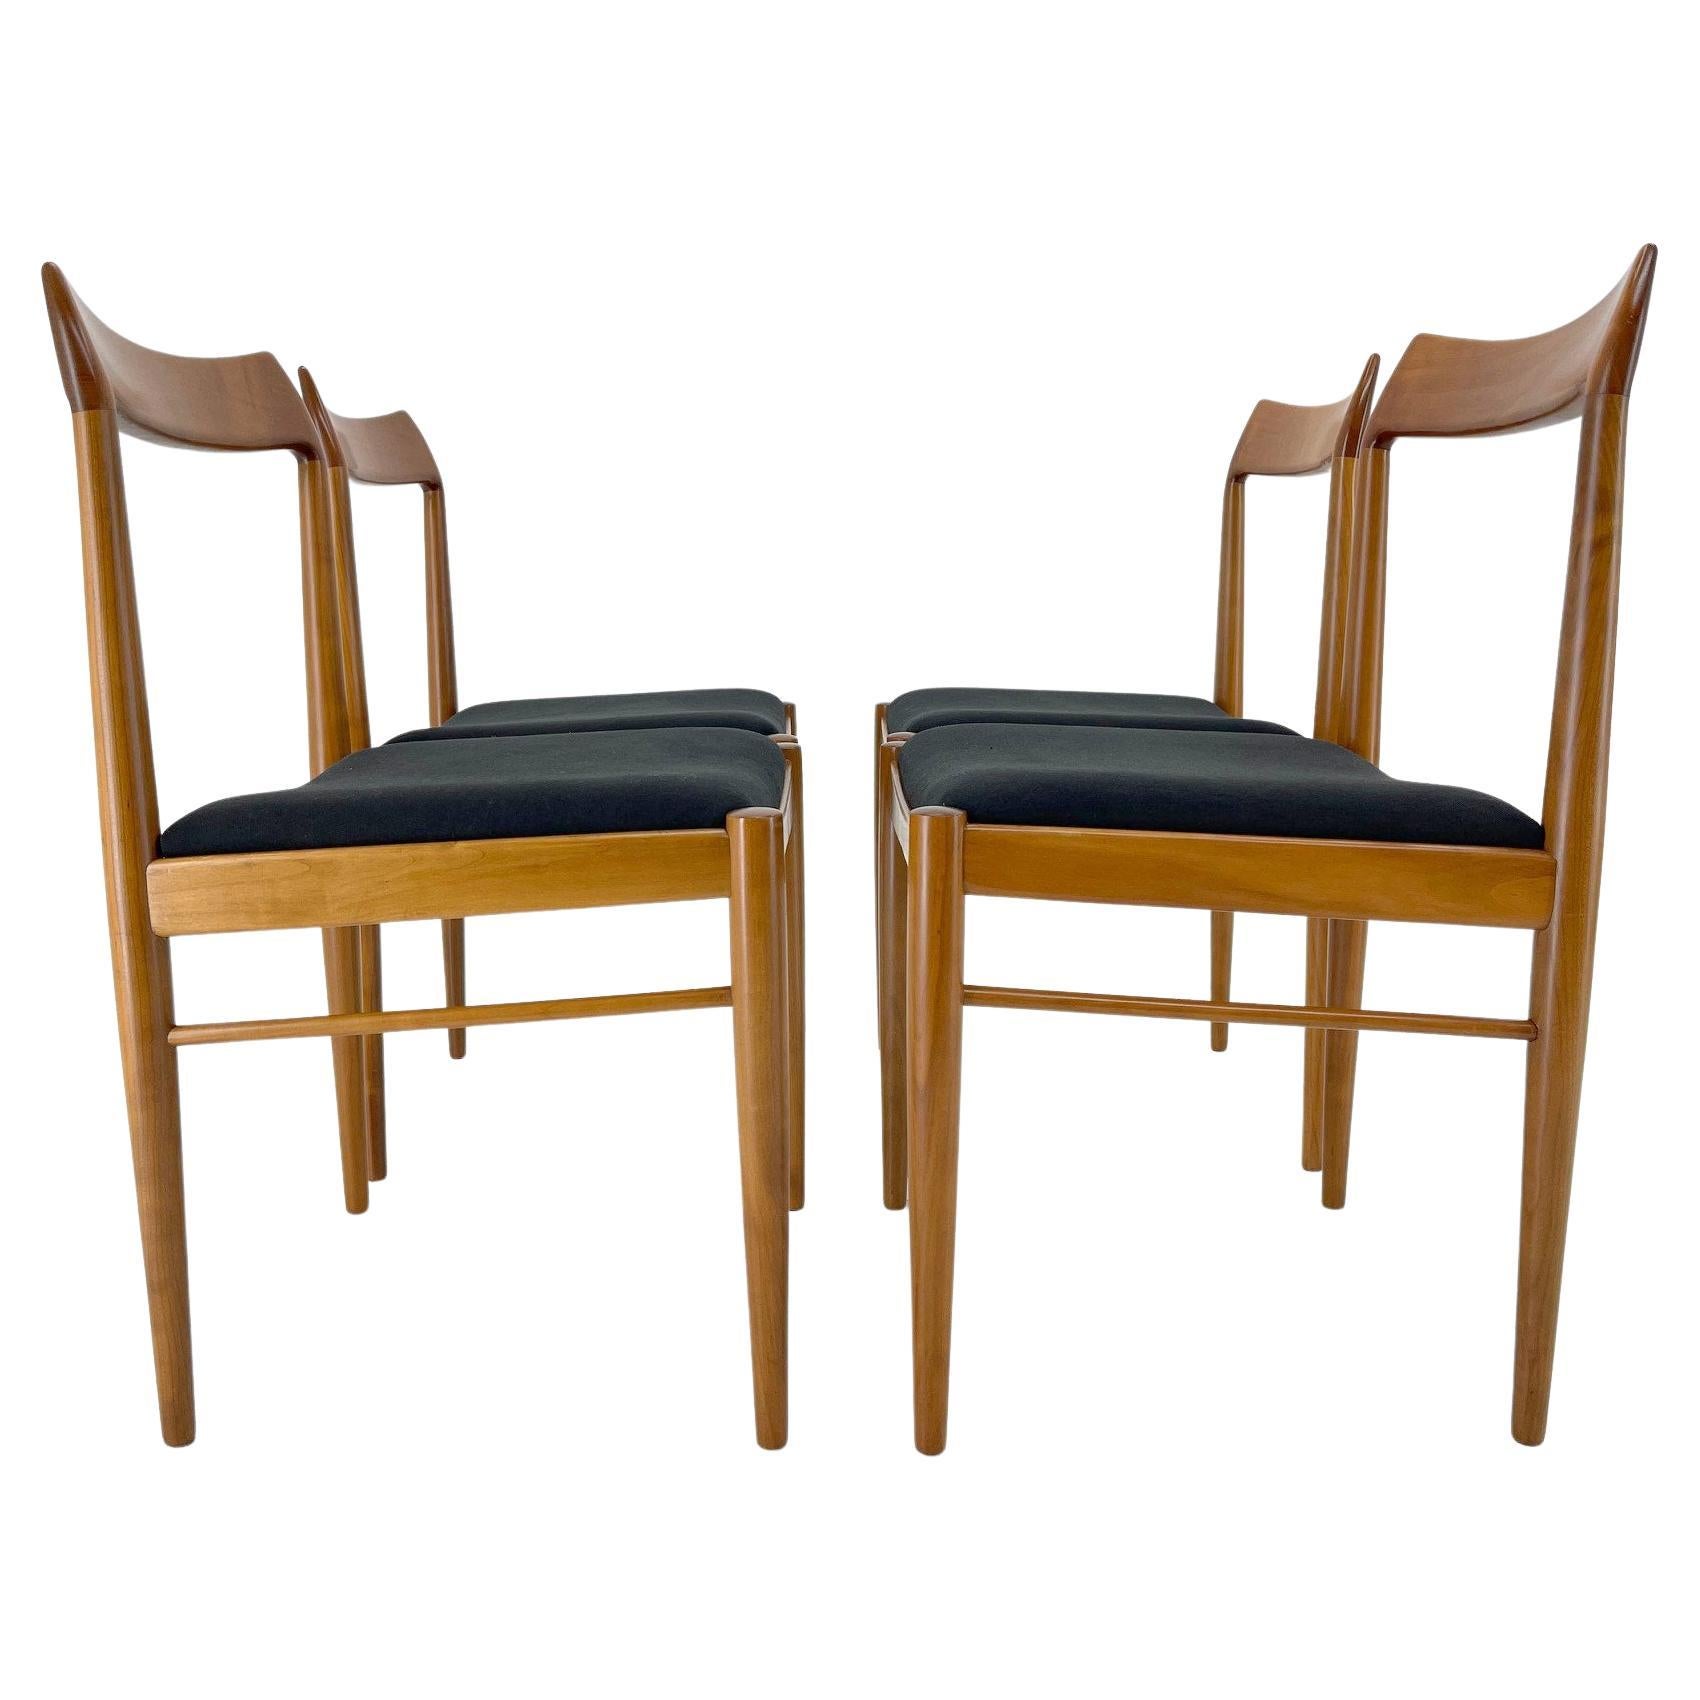 Set of 4 Danish Dining Chairs, 1960's